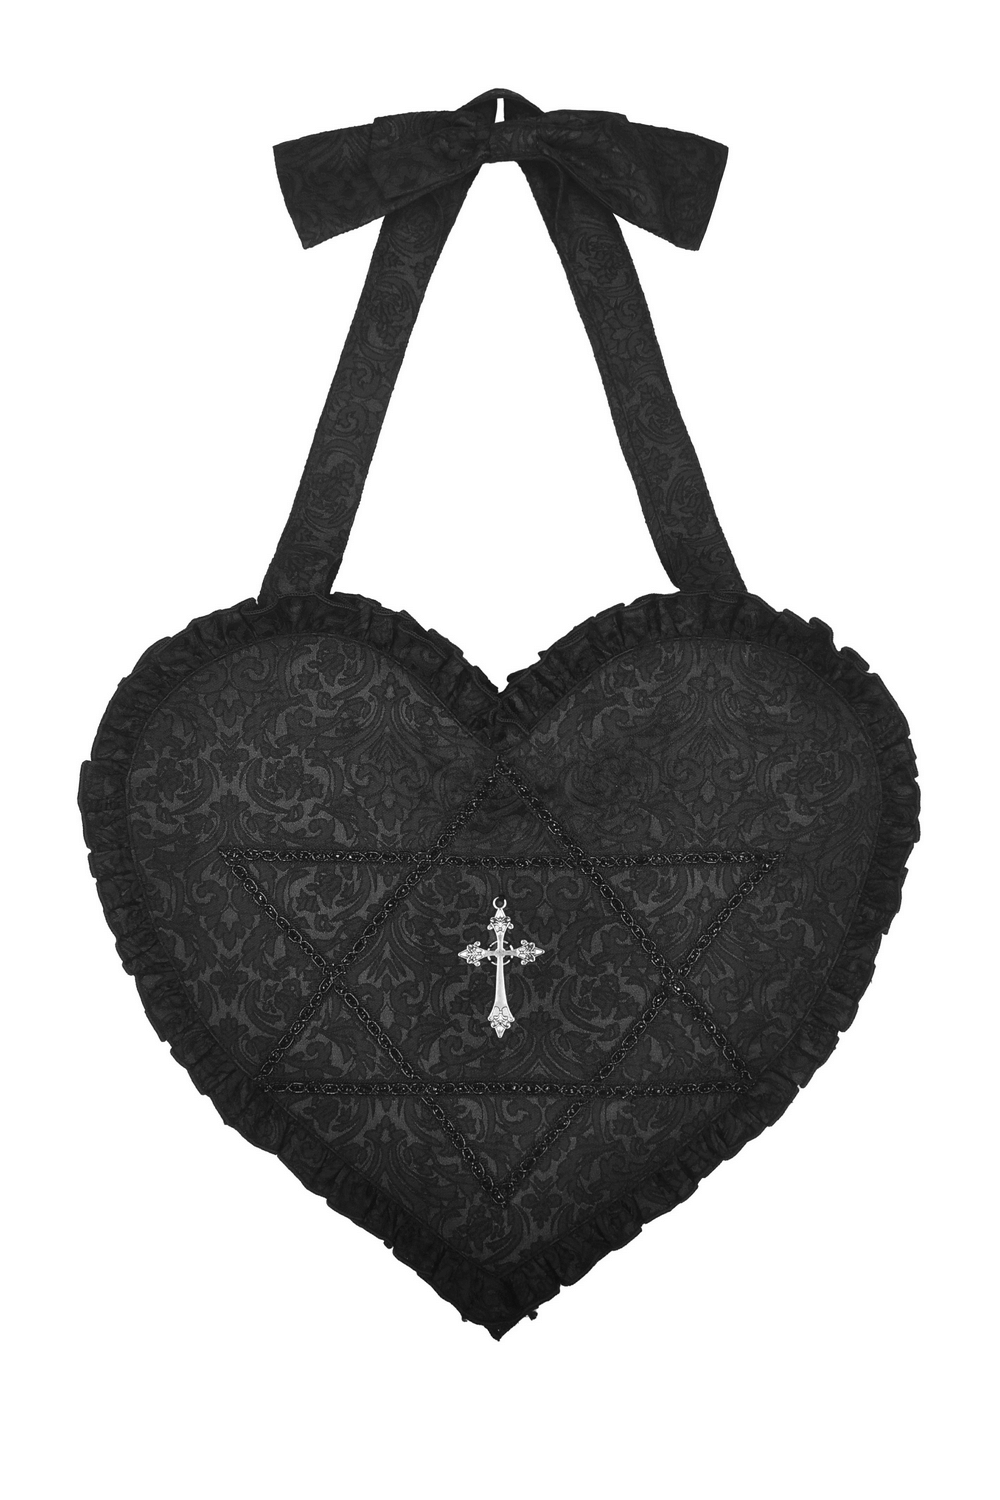 Gothic Women's Heart Shoulder Bag with Cross Detail